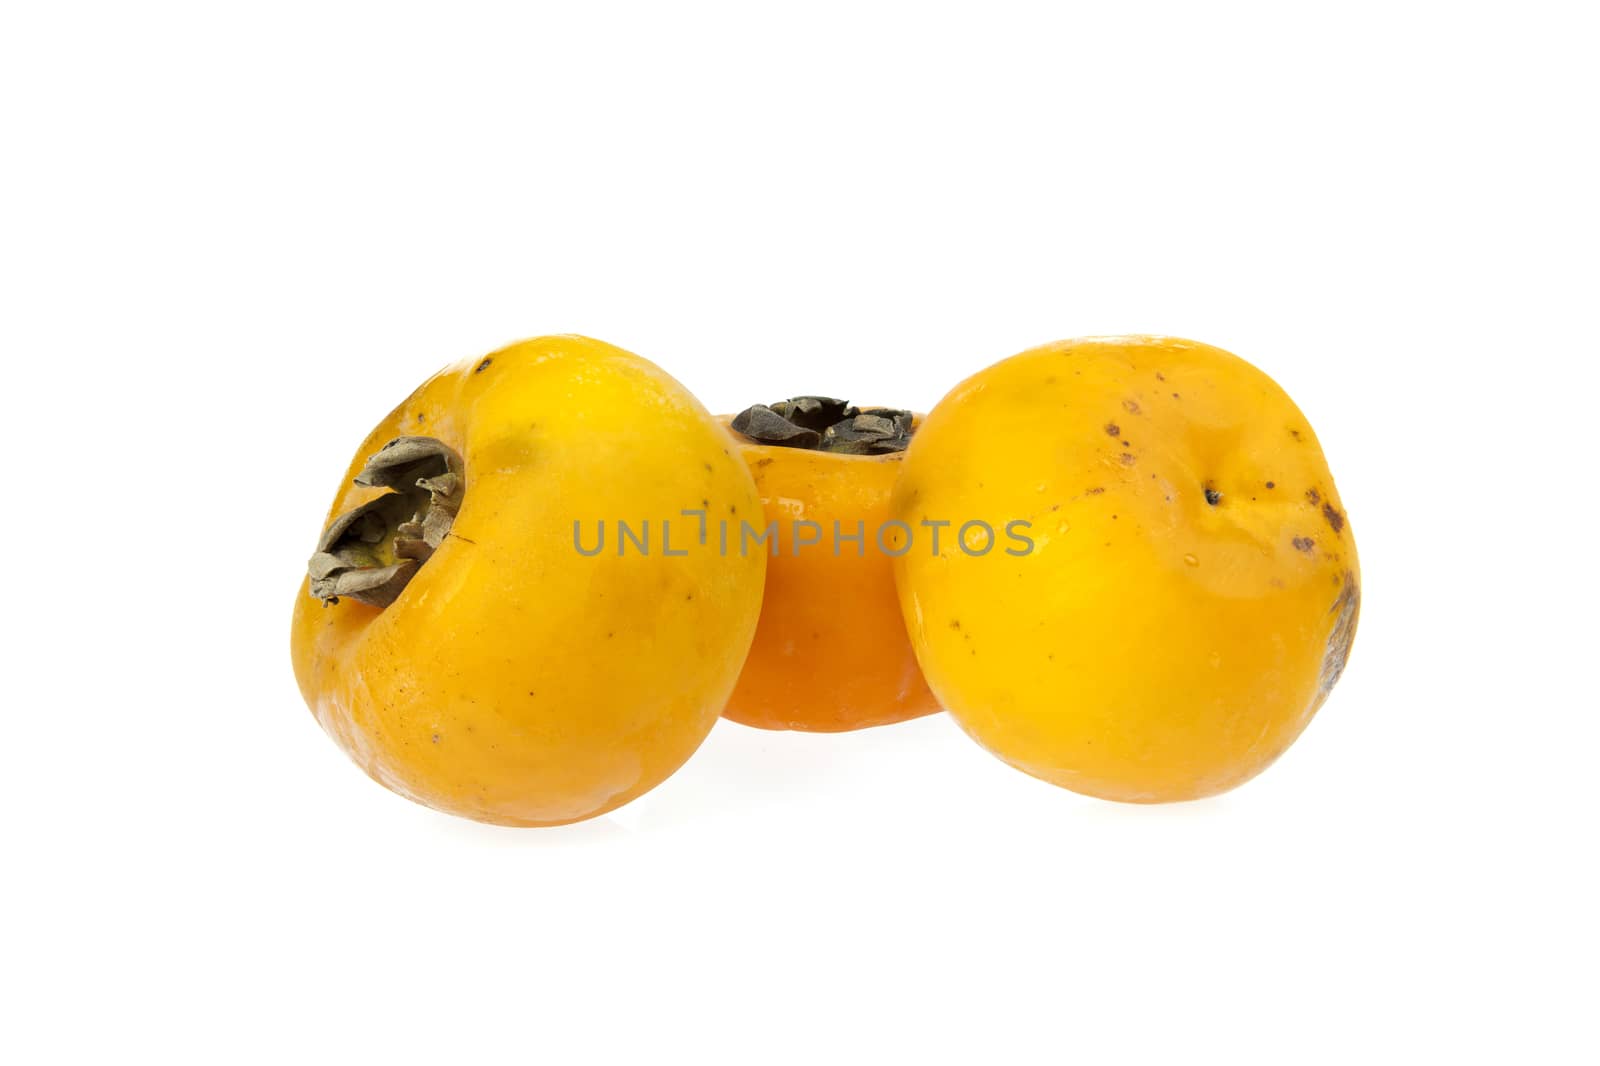 Three fresh Persimmons on a white background